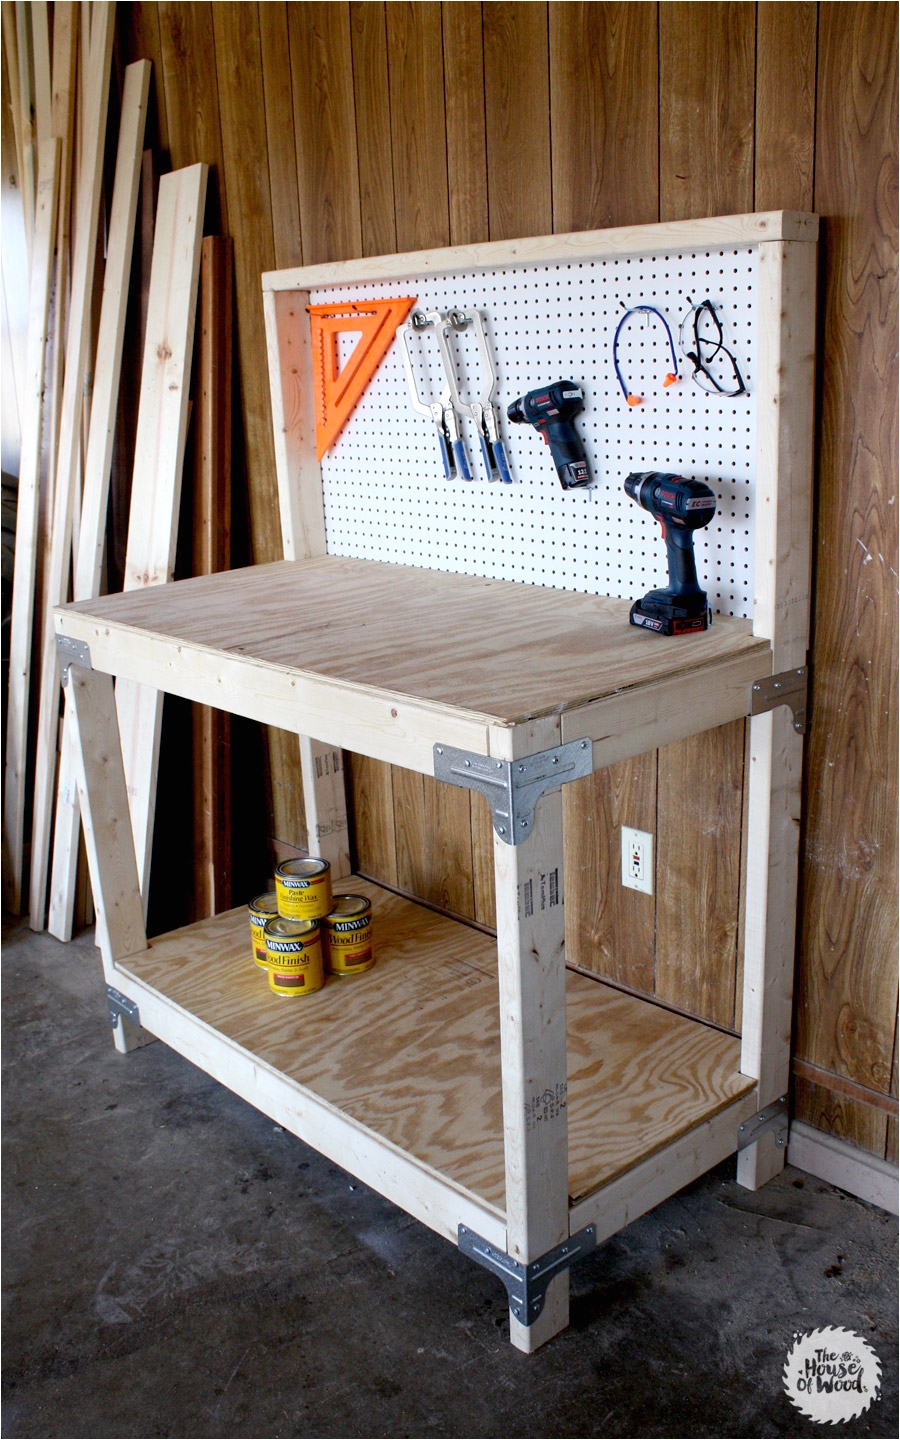 Home Depot Kids Work Bench Diy Workbench with Simpson Strong Tie Workbench Kit